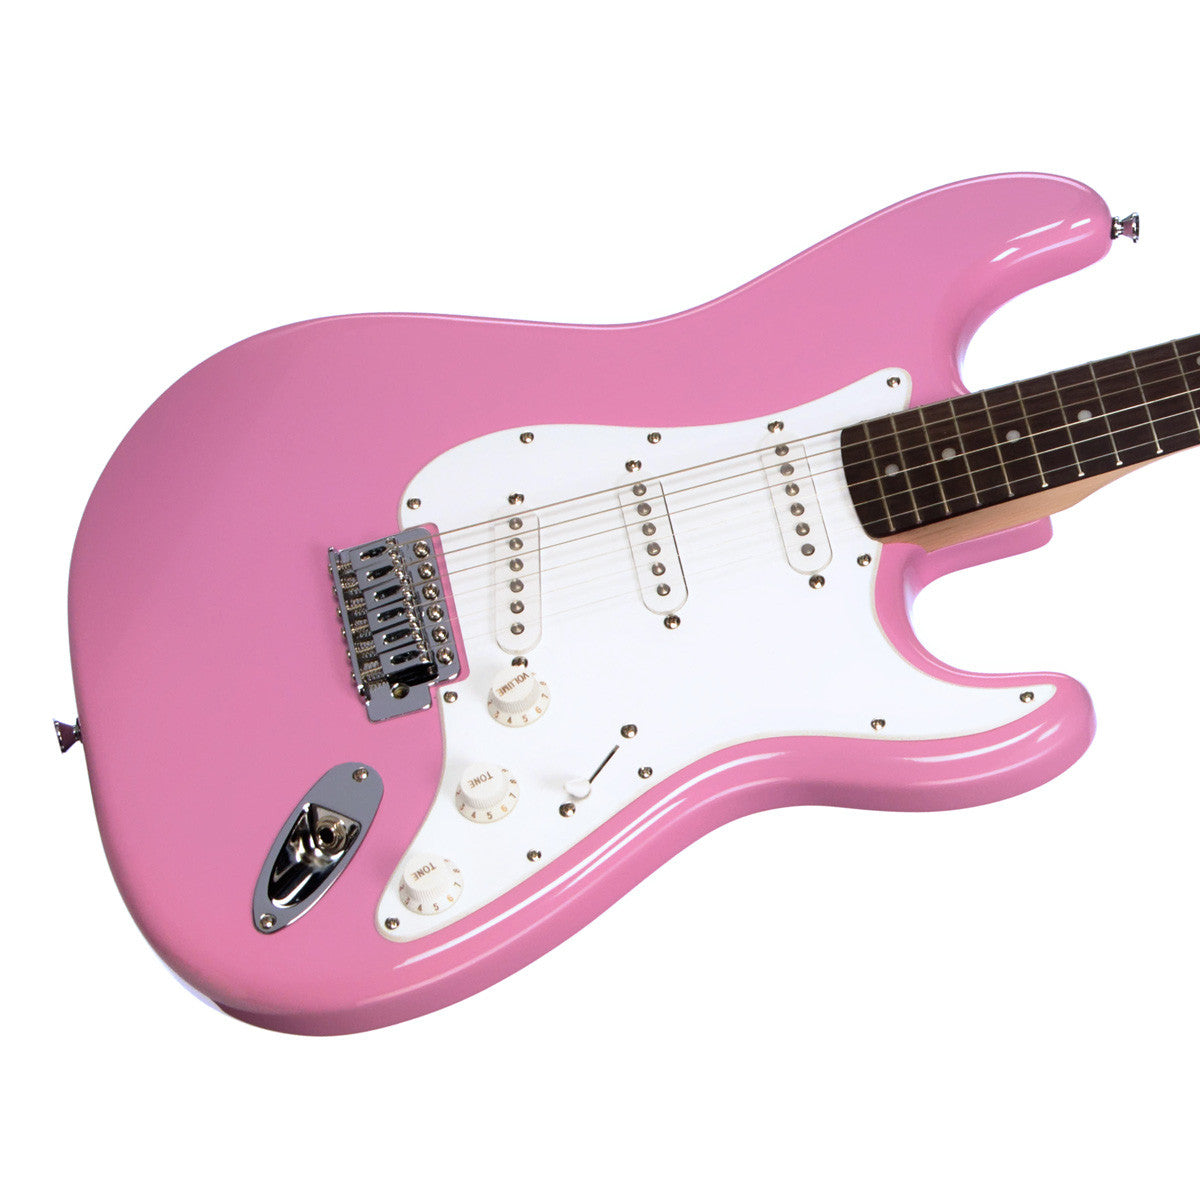 Squier Bullet Strat with Tremolo | Make'n Music